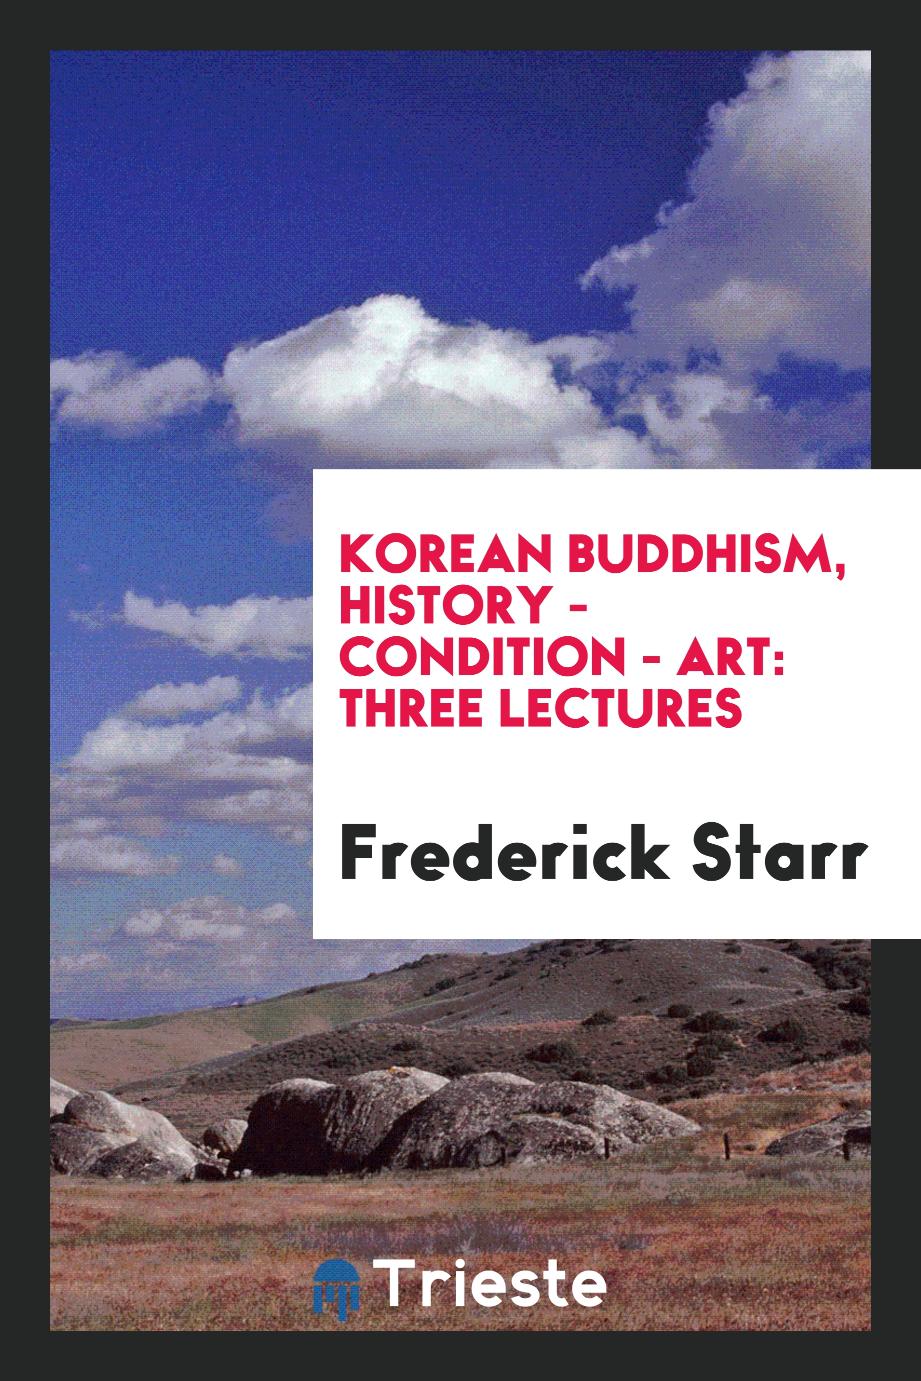 Korean Buddhism, History - Condition - Art: Three Lectures